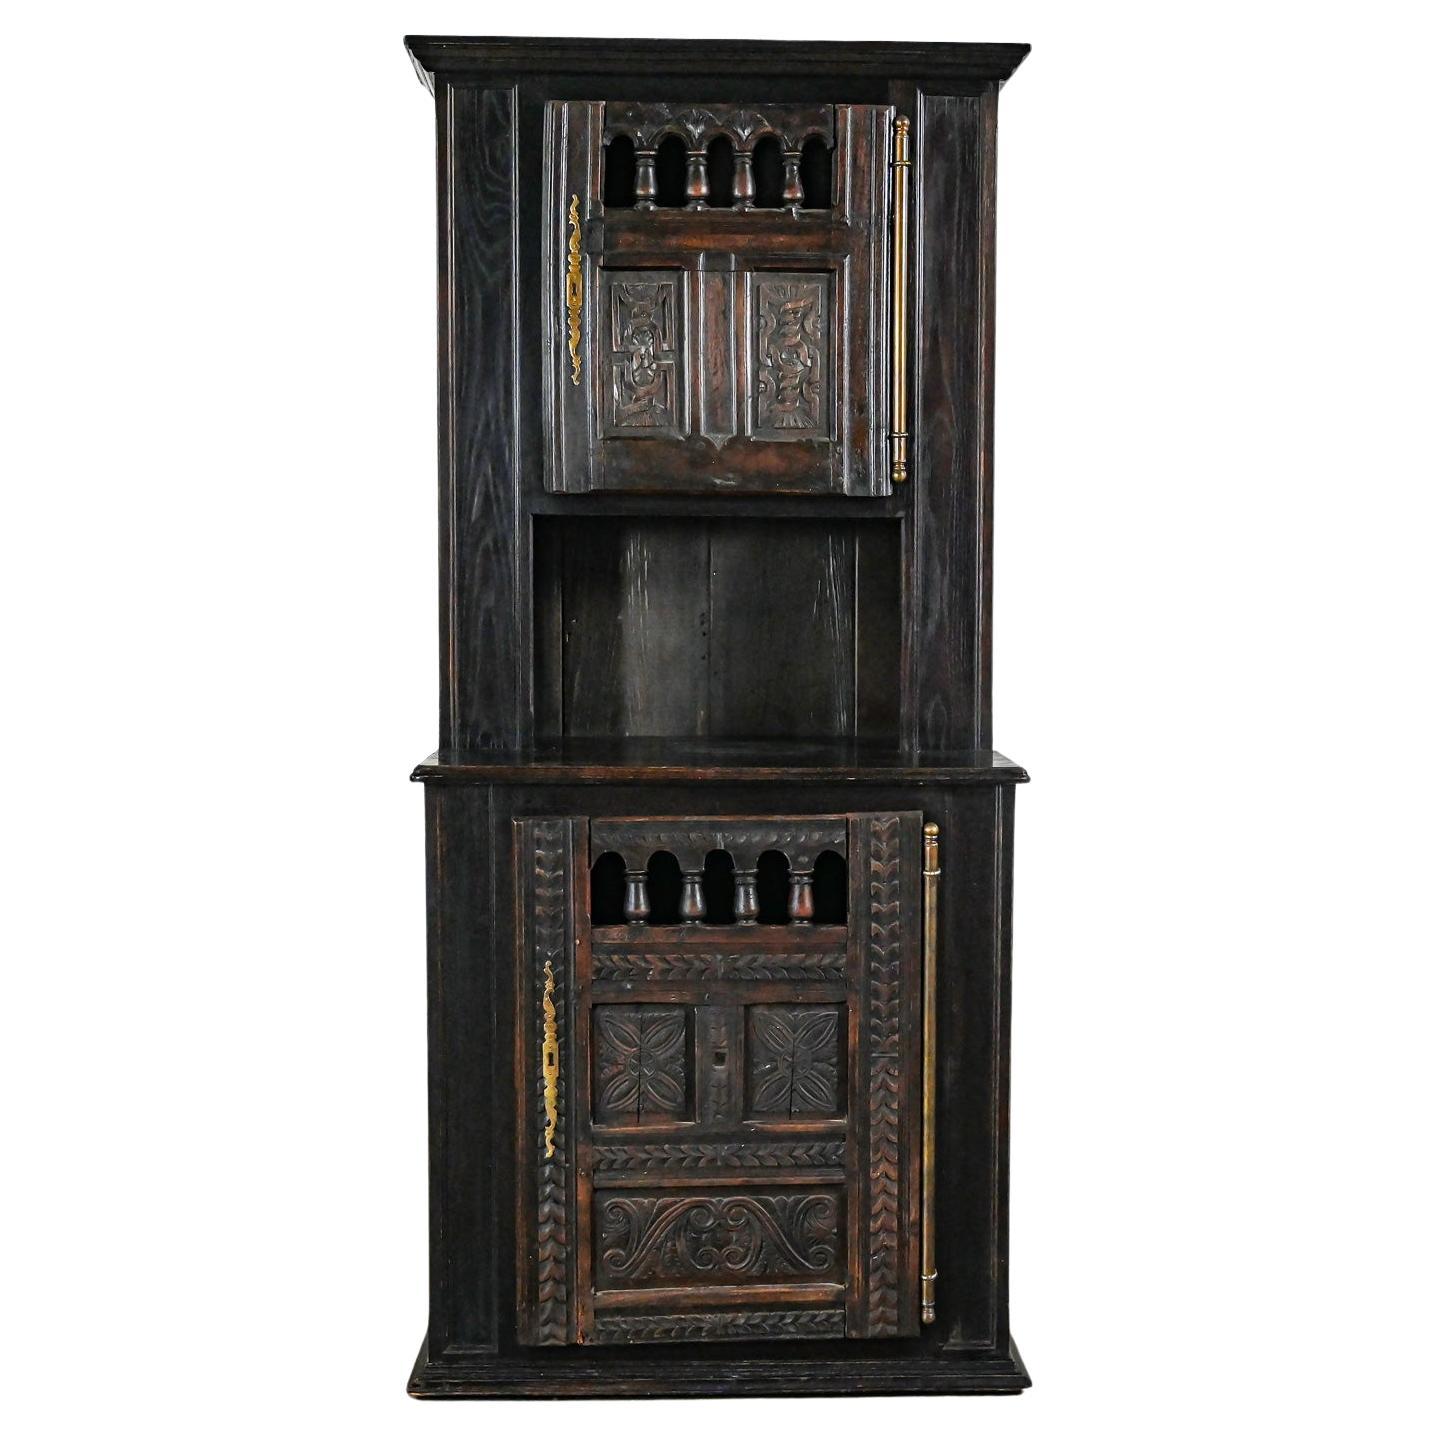 Spanish Colonial Revival Style Oak Cupboard Hutch Cabinet or Dry Bar Hand Carved For Sale